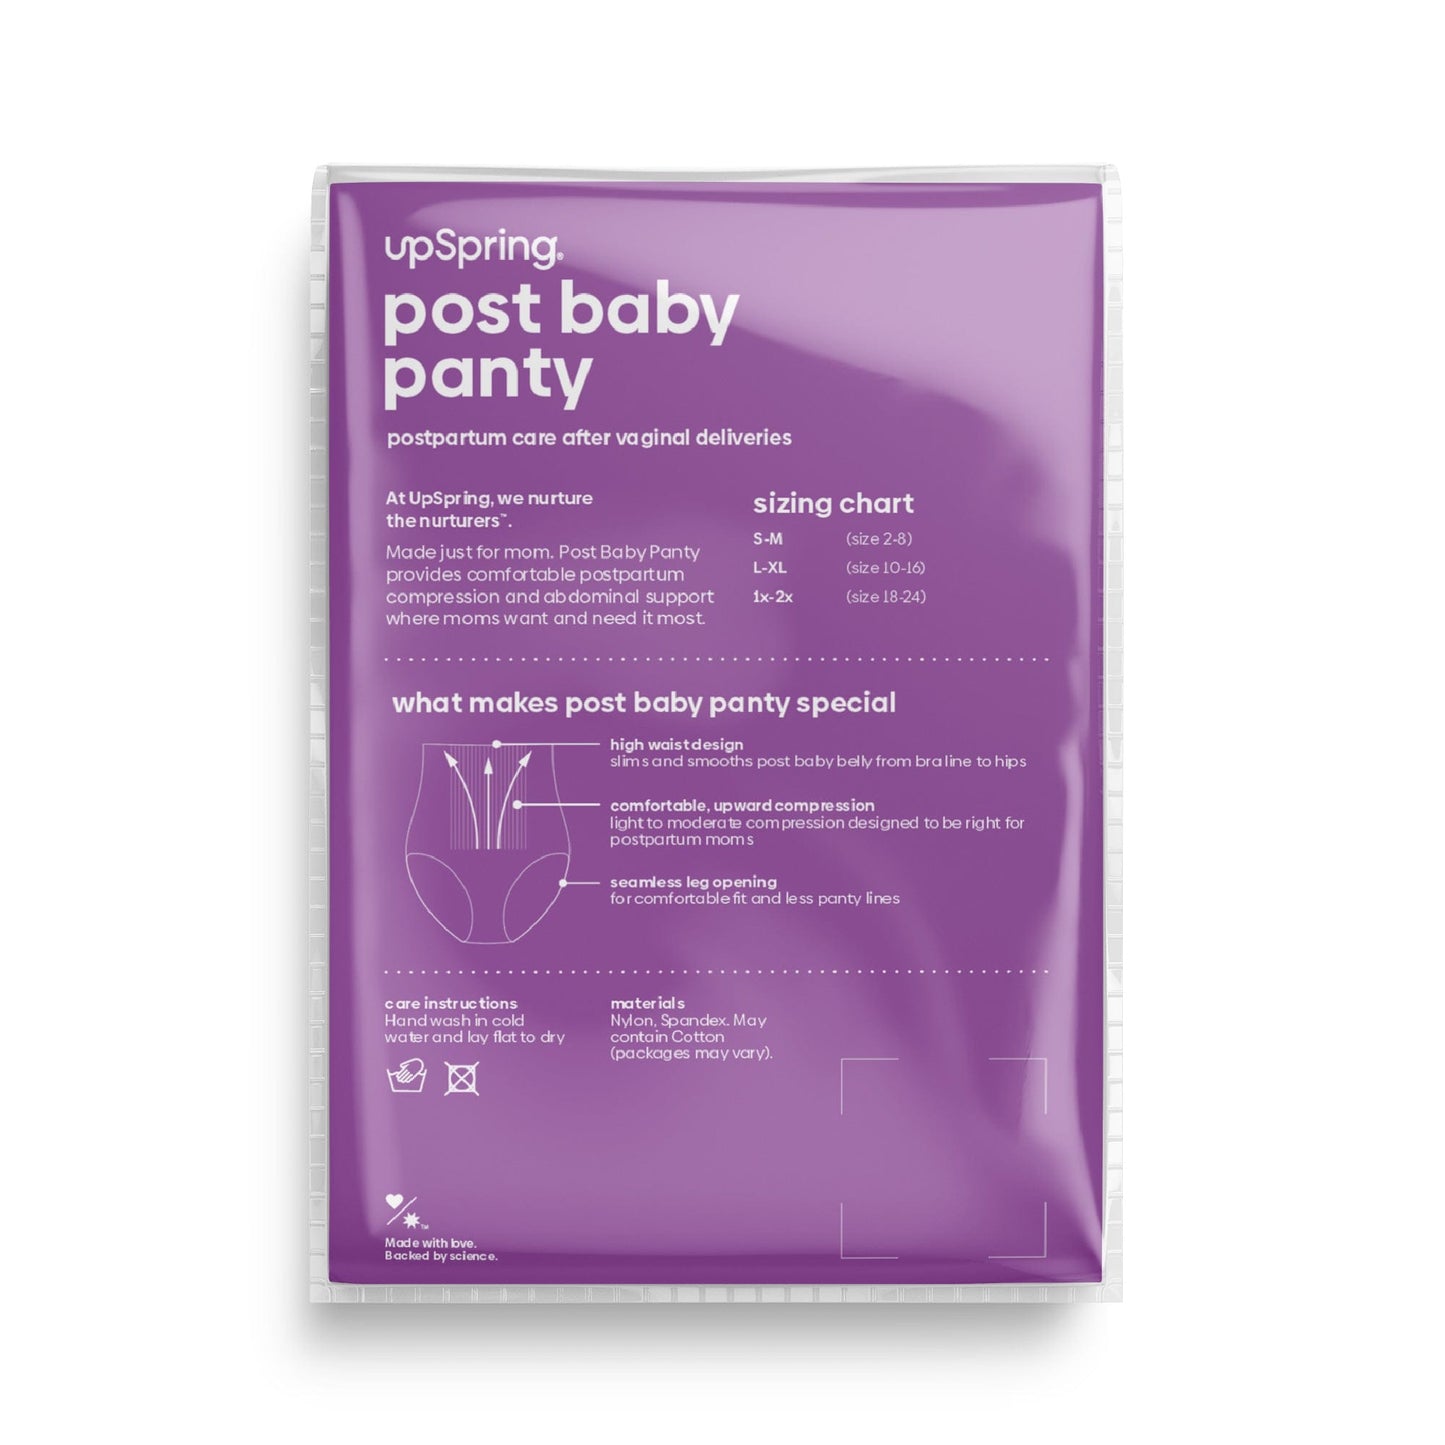 The back of the product package for Post Baby Panty